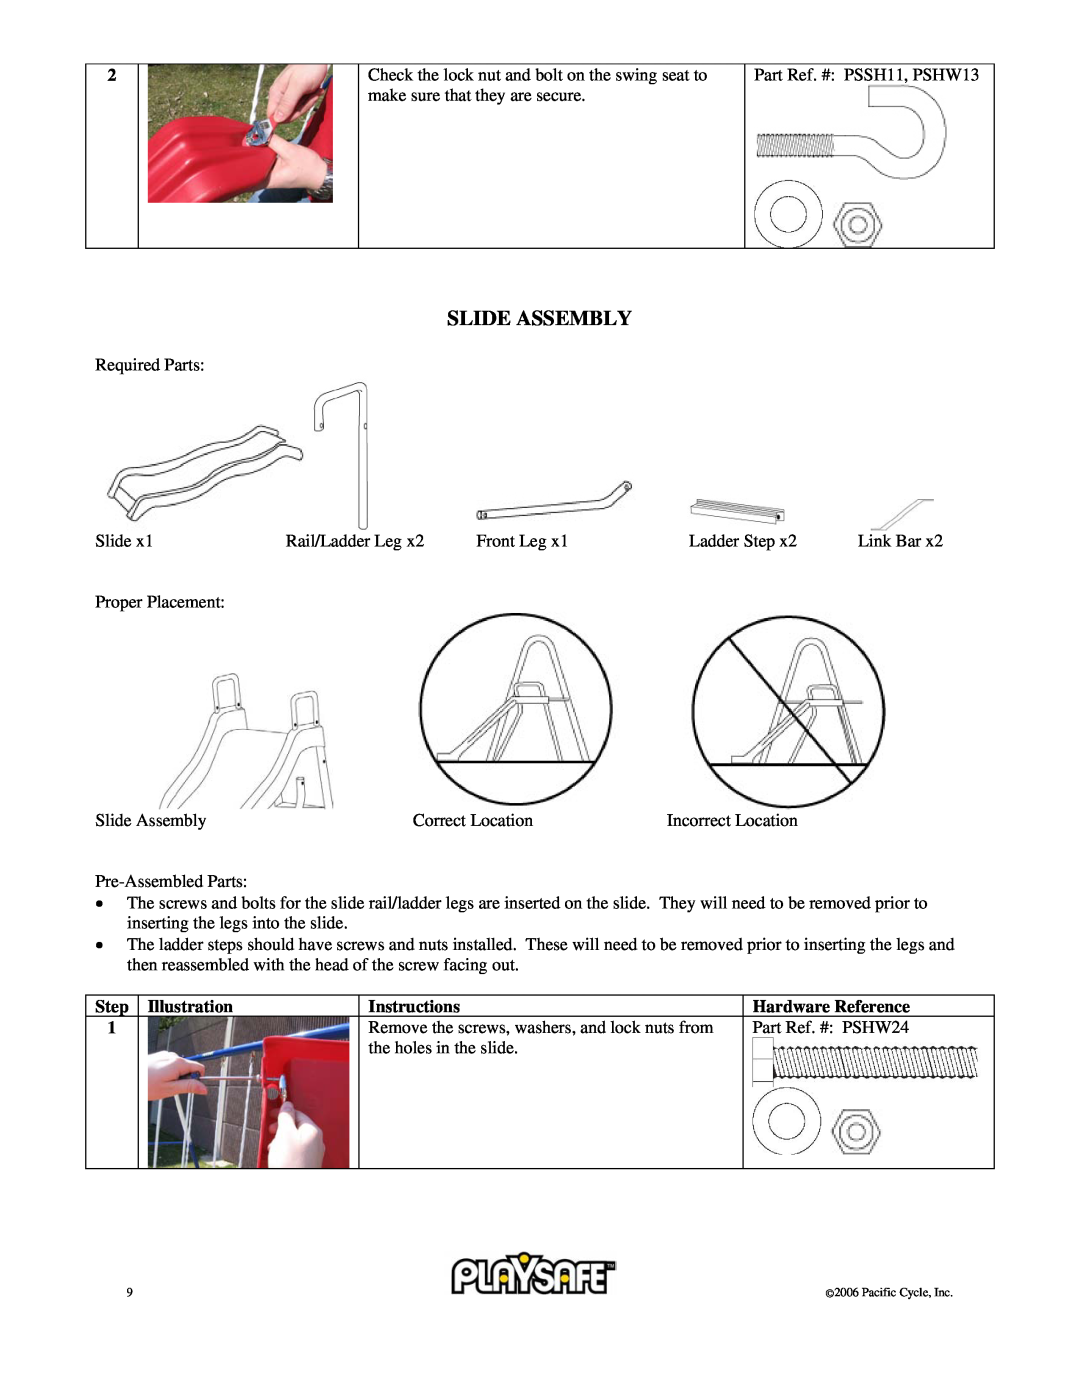 Pacific Cycle 22-PS245 Slide Assembly, Step, Illustration, Instructions, Remove the screws, washers, and lock nuts from 